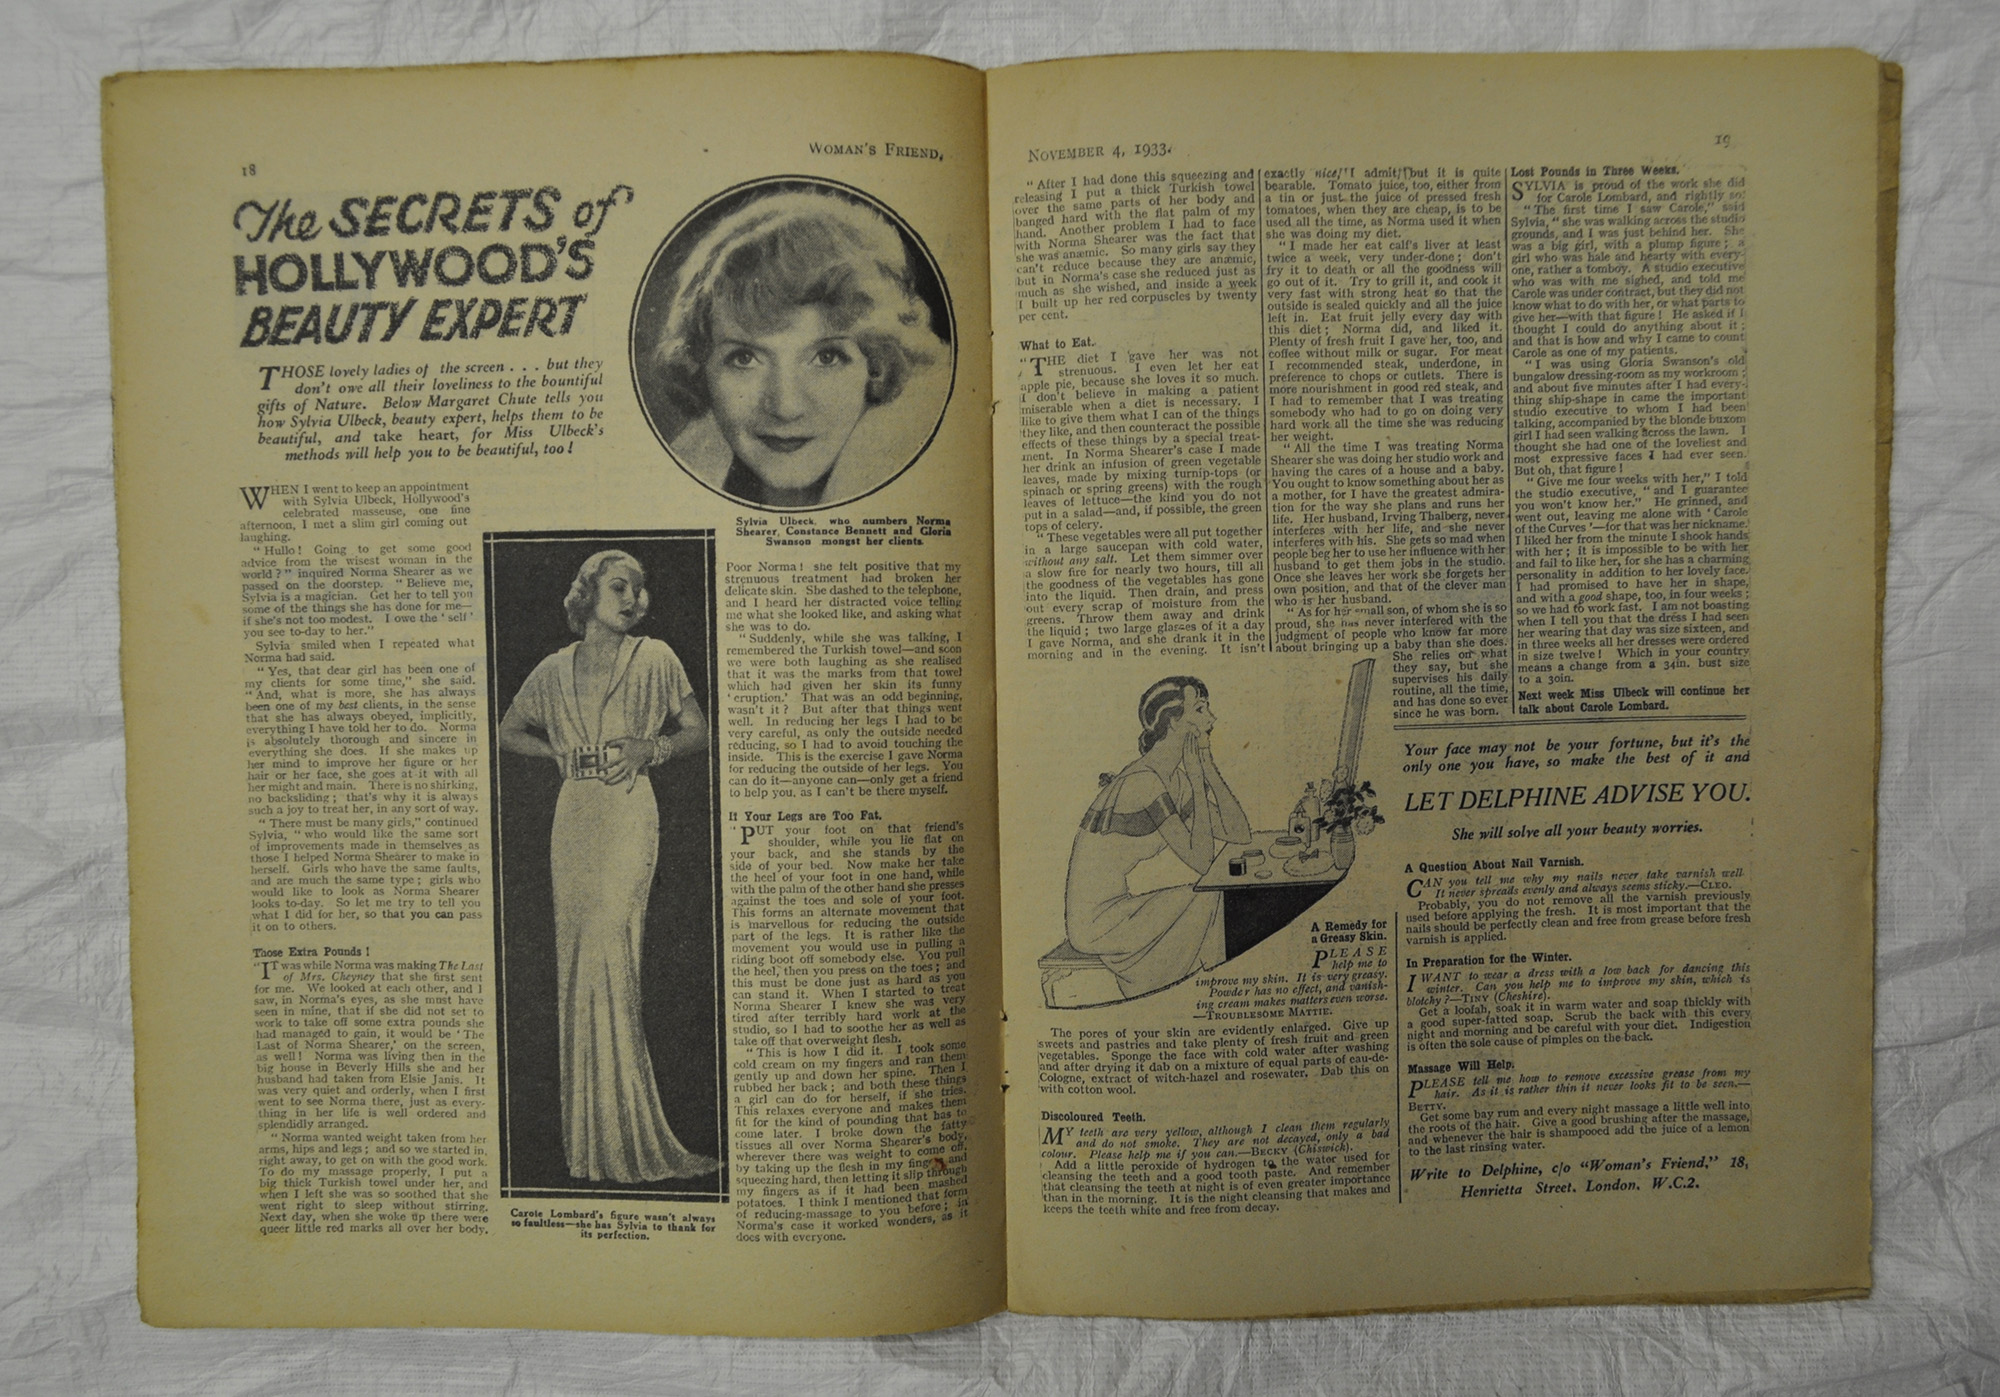 A double page magazine spread from the 1930s titled, "The Secrets of Hollywood's Beauty Expert", with images of popular stars from the time